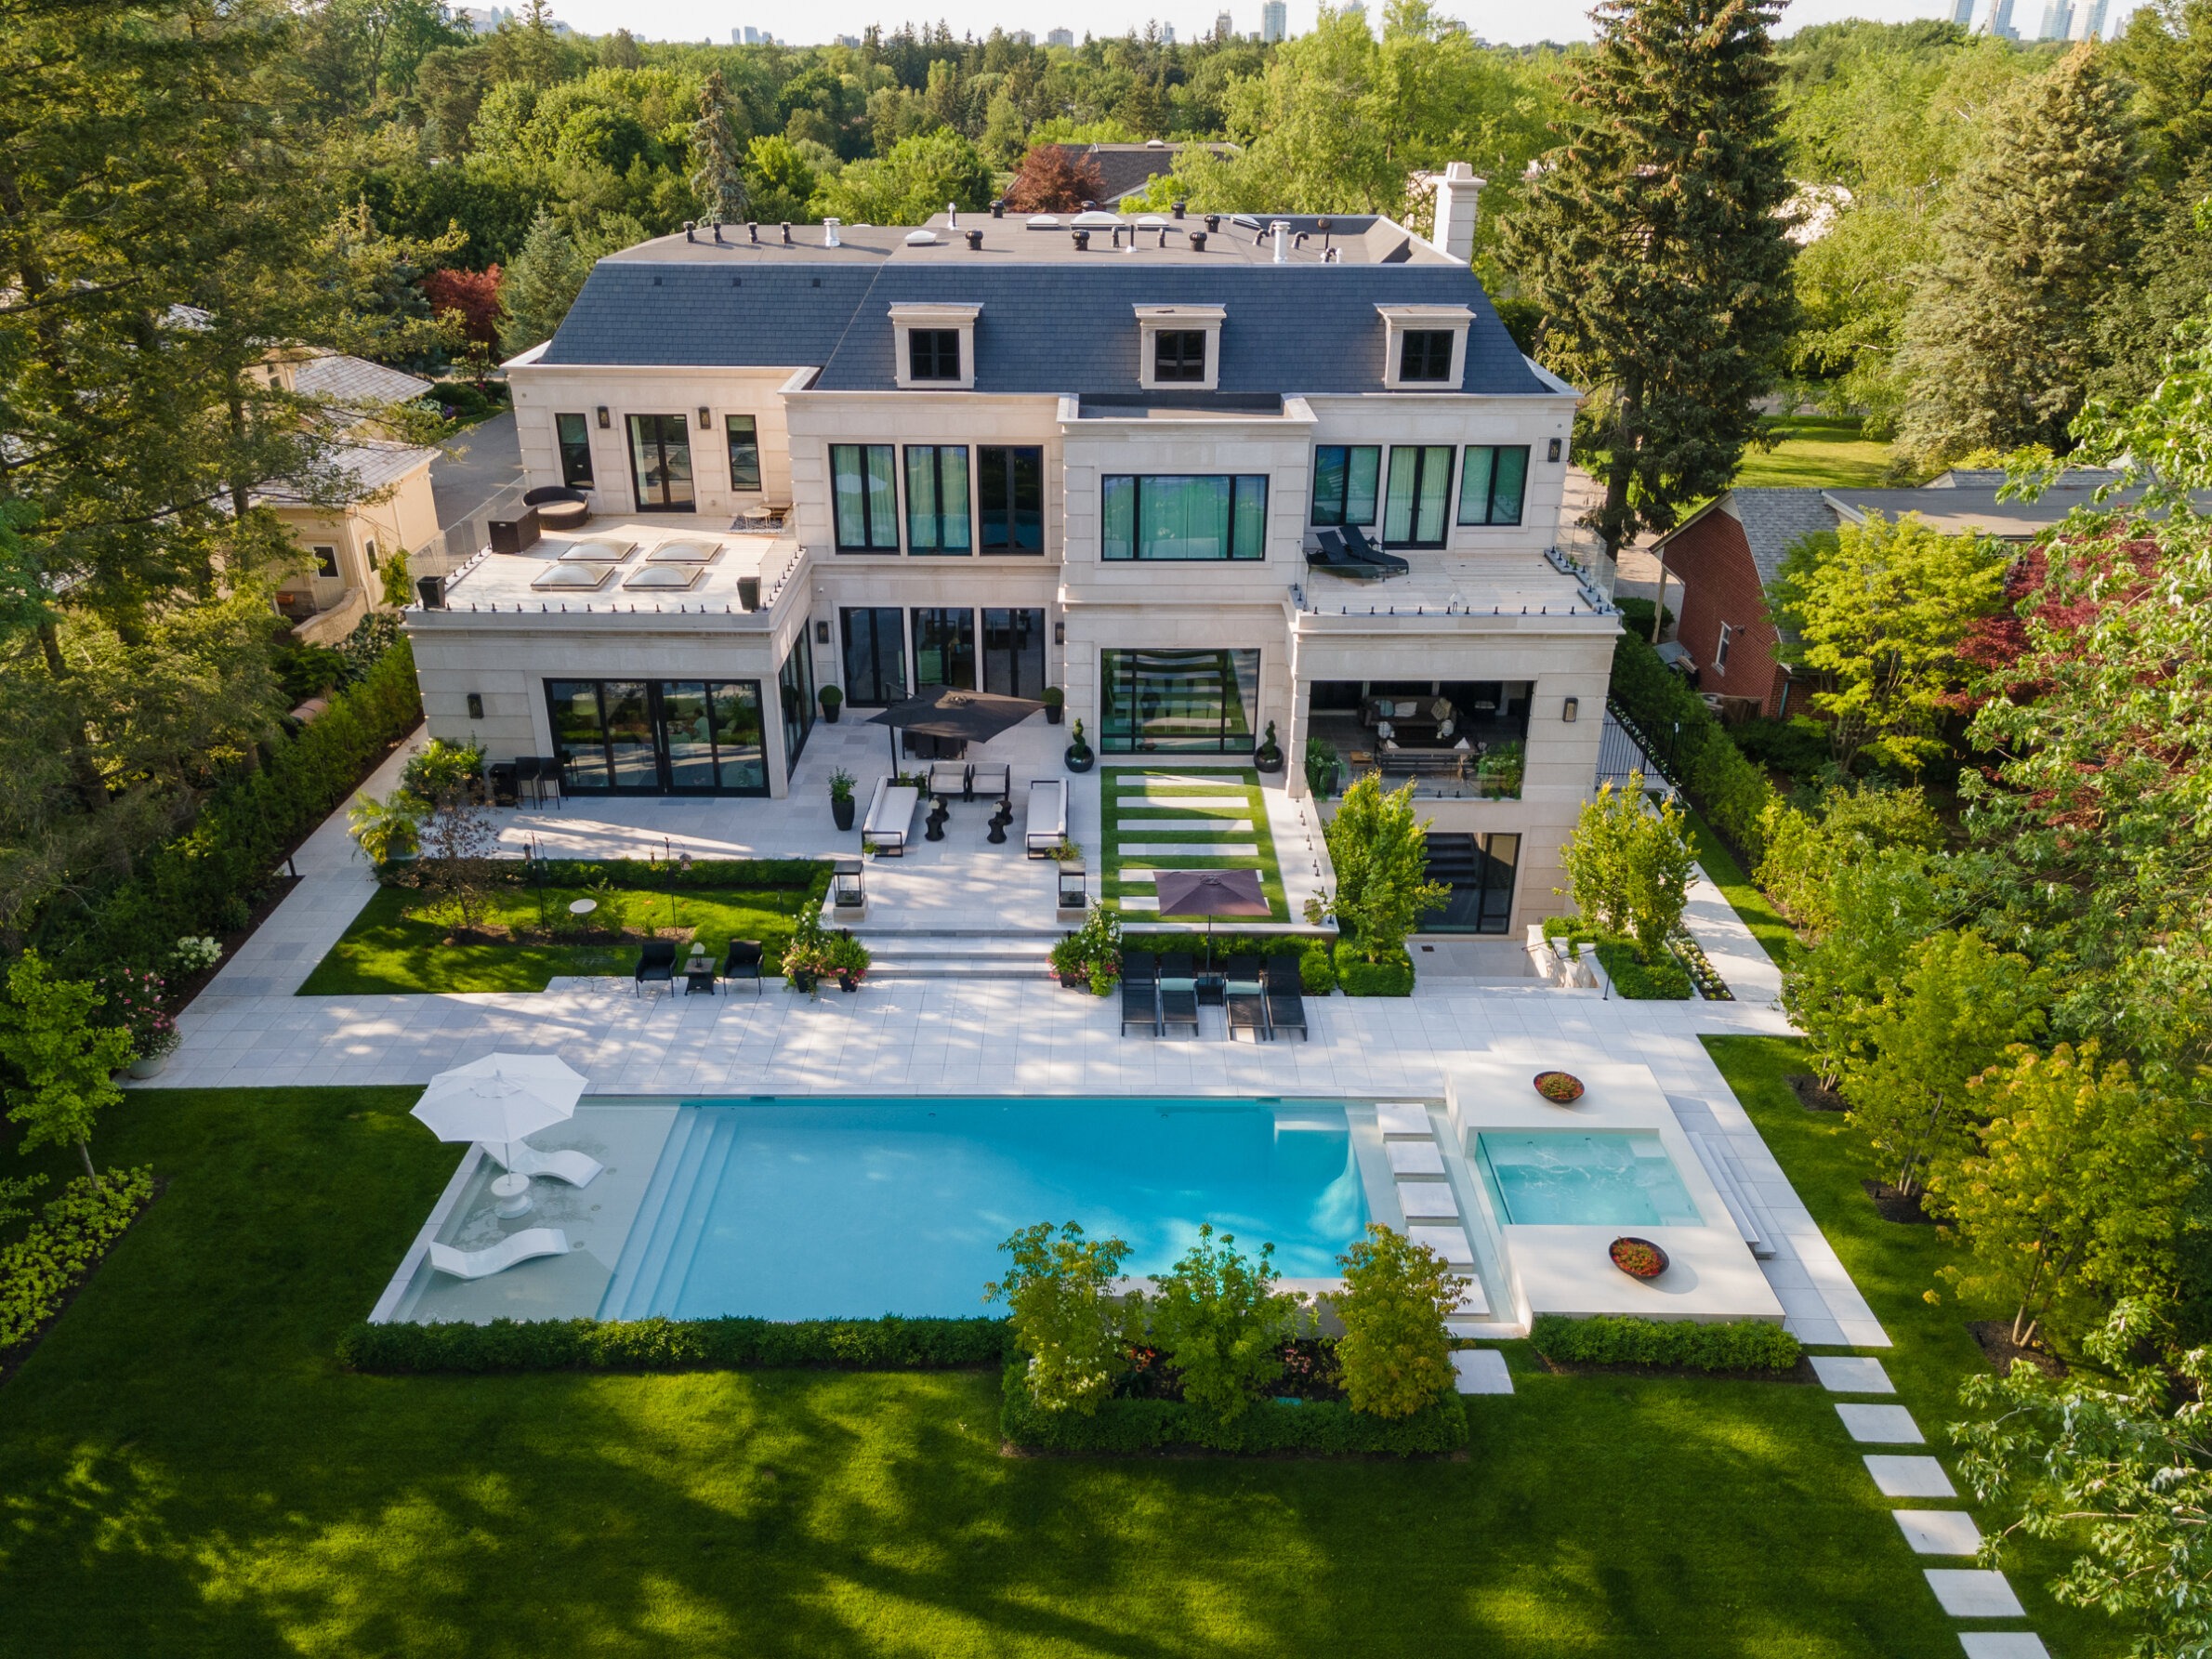 Aerial view of a large, luxurious house with a neatly landscaped backyard, featuring a swimming pool, outdoor seating, and surrounding greenery.